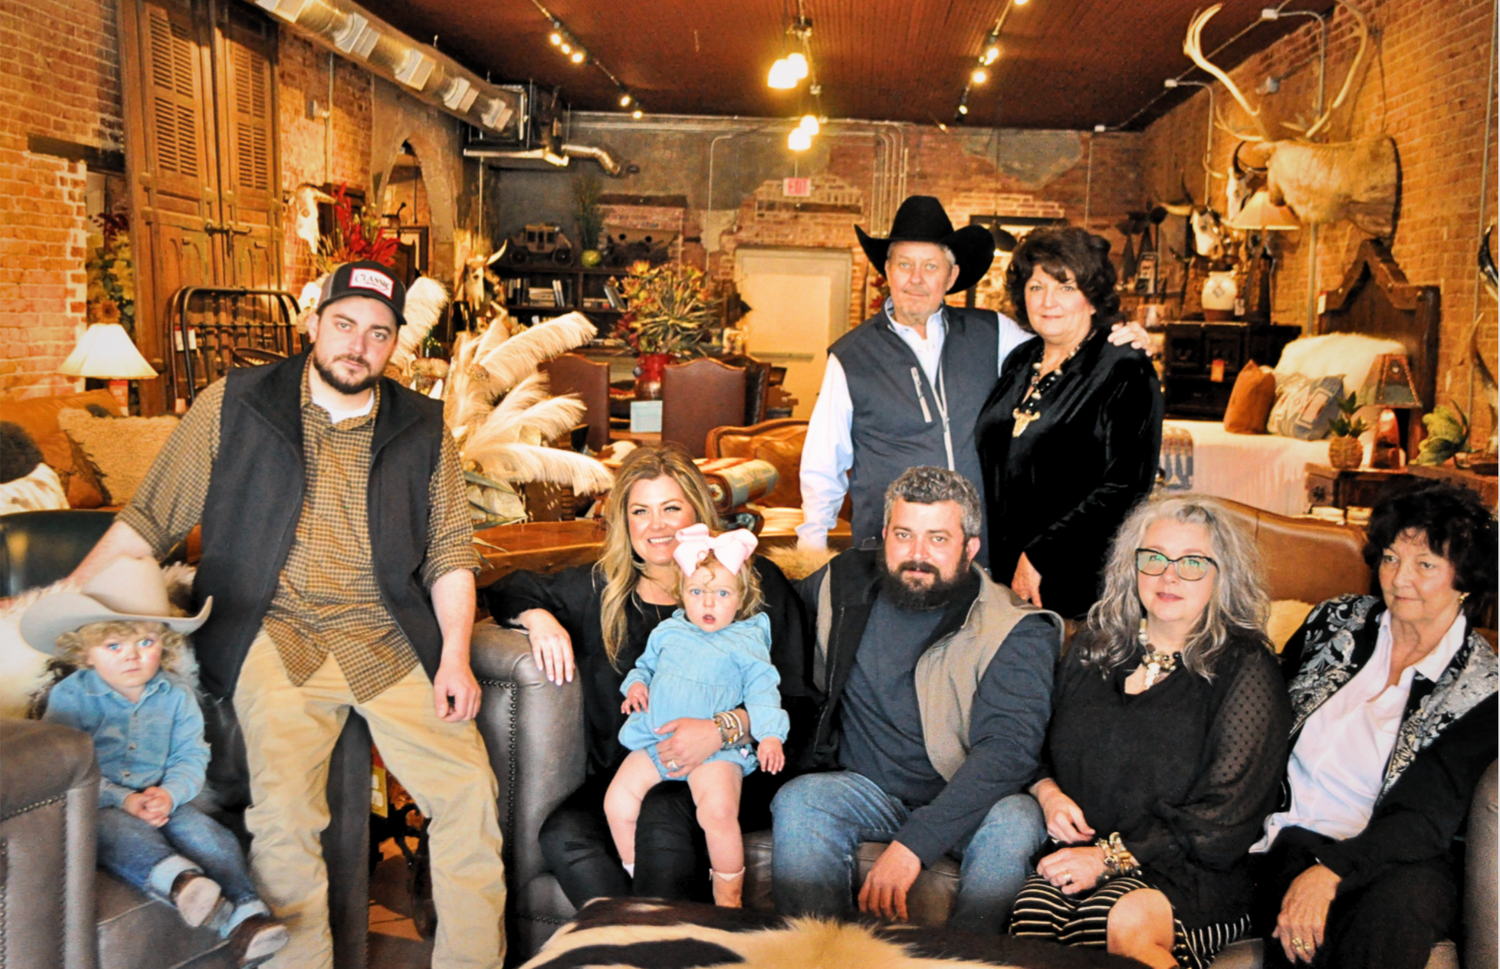 Into the West is a Fort Worth Western store specializing in custom leather furniture, western style furniture and western decor designed to make your home feel welcoming and warm. 